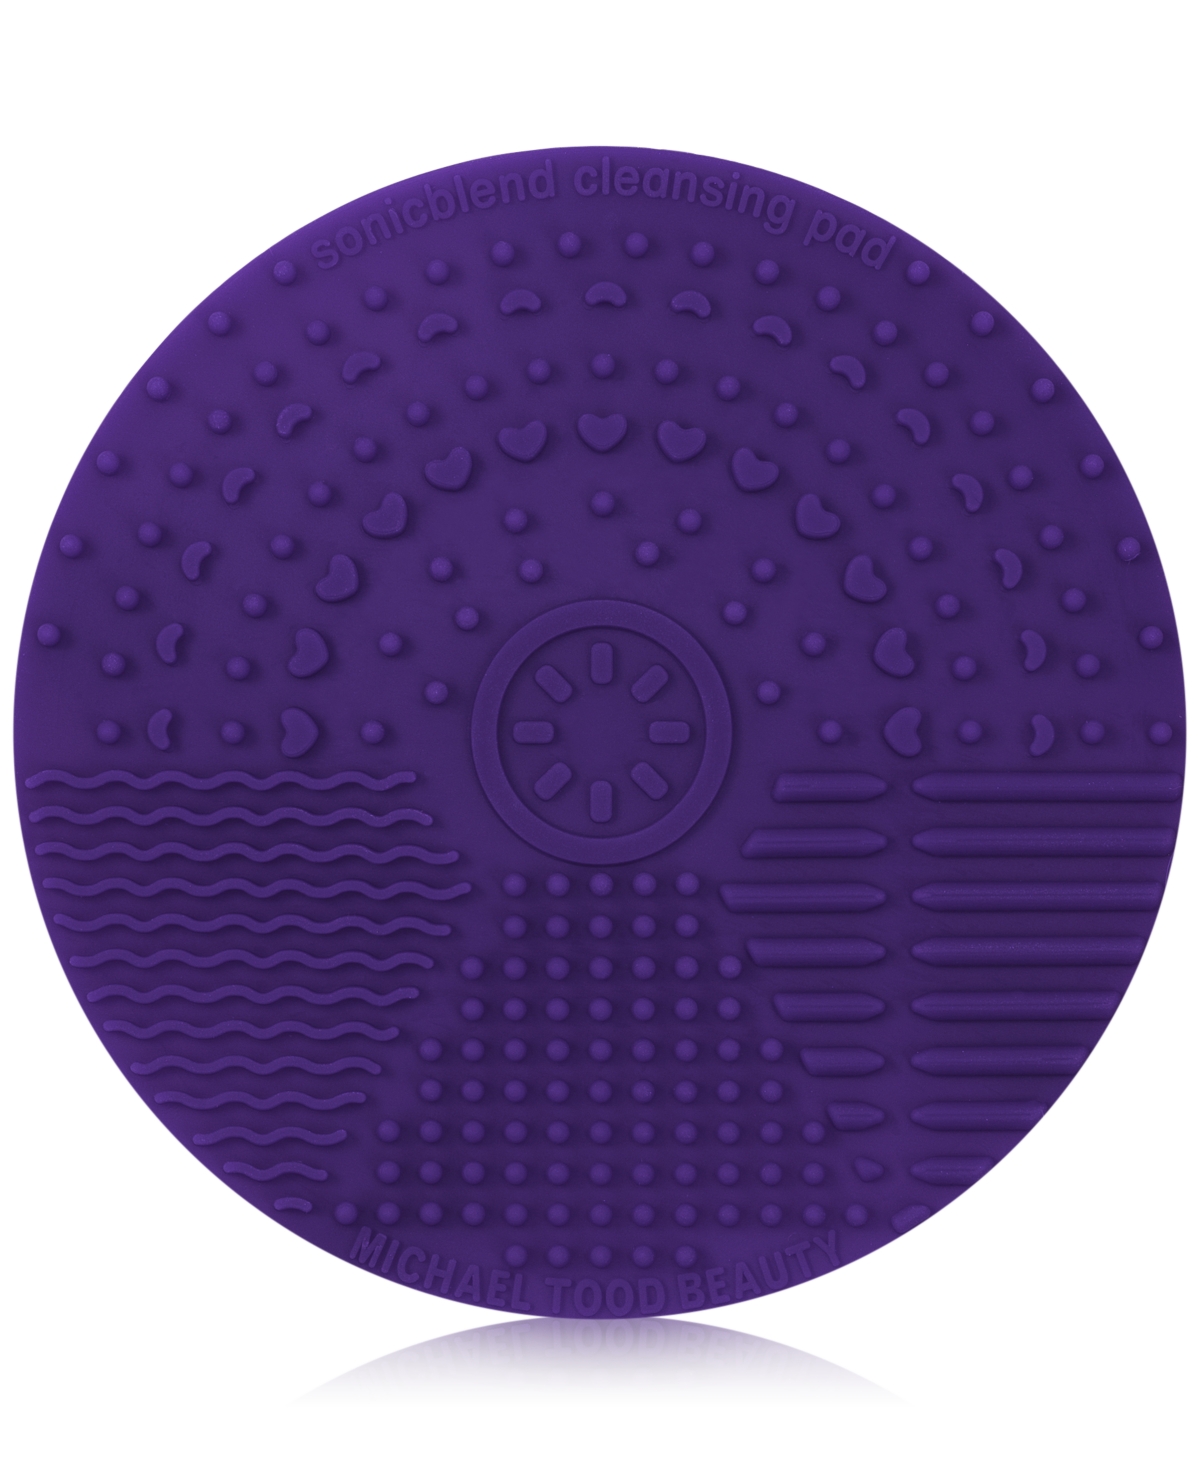 Sonicblend Cleaning Mat - Purple